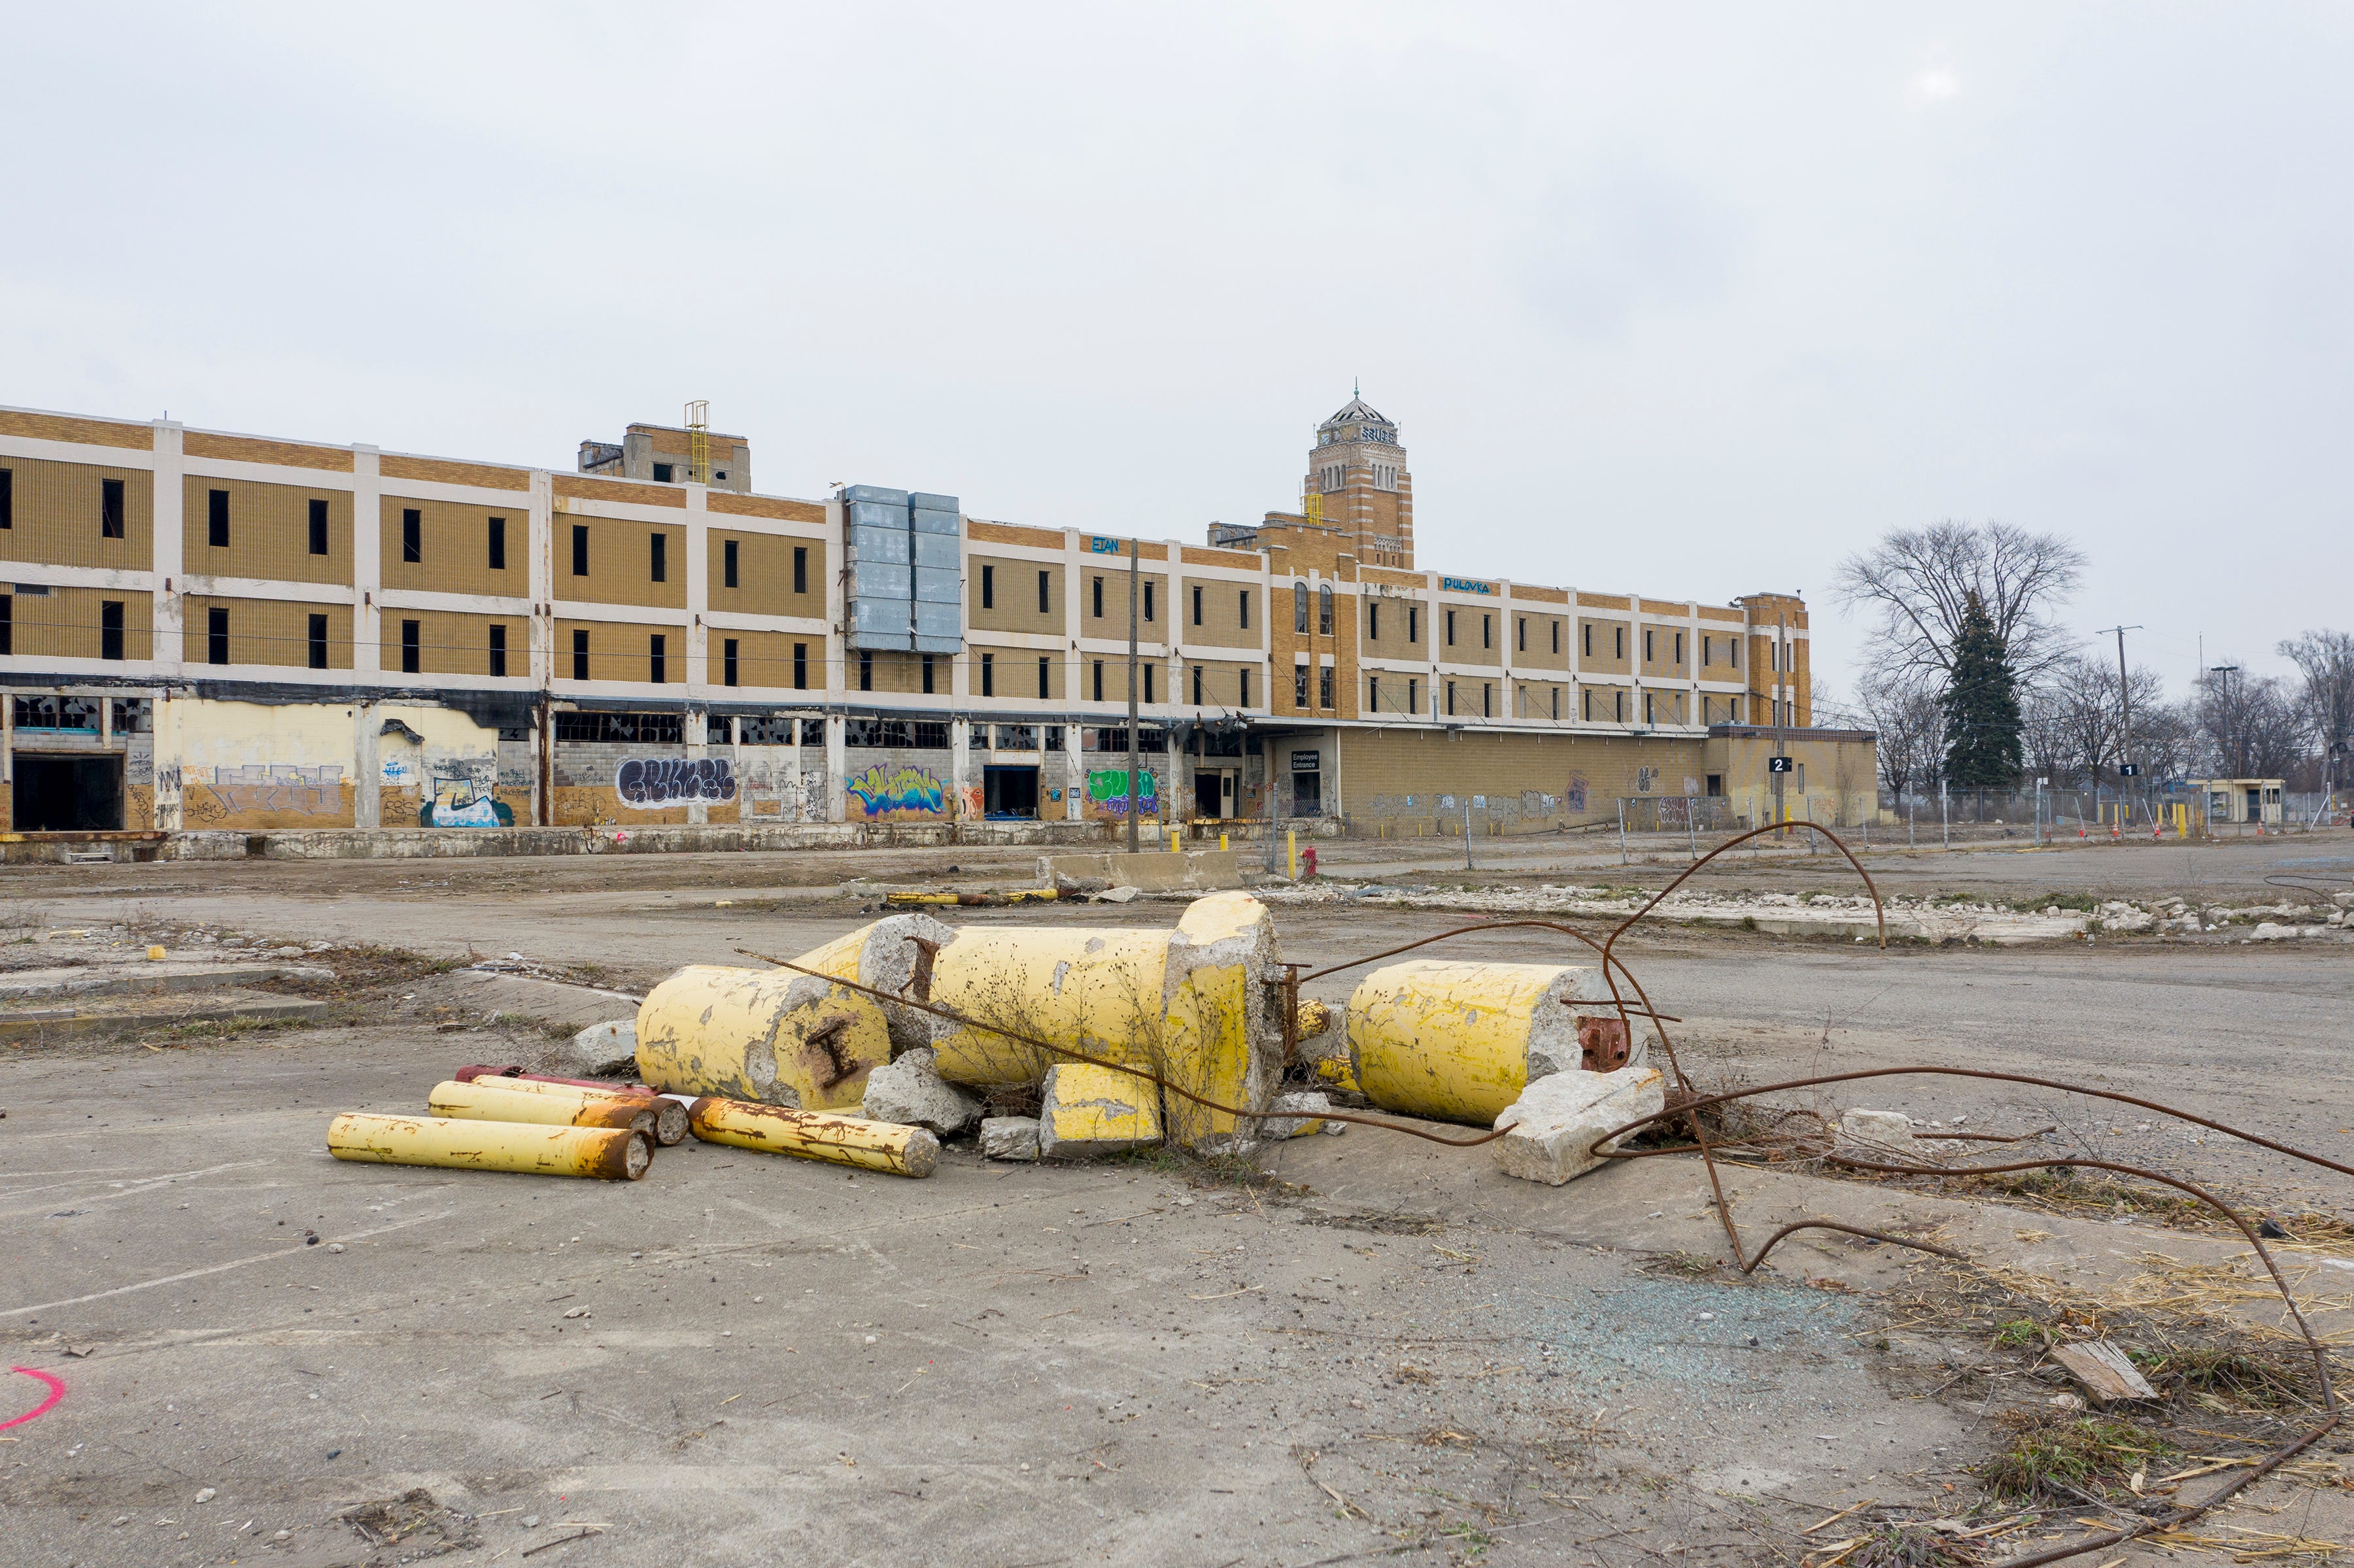 The former American Motor headquarters in Detroit that has sat abandoned since 2010, on Thursday, Dec. 9, 2021. An agreement between NorthPoint Development and the city would sell the city-owned land, including the buildings and 26 residential parcels, to NorthPoint Development for nearly $5.9 million. The company proposes to raze the existing facility and build a new industrial complex suitable for an automotive supplier.